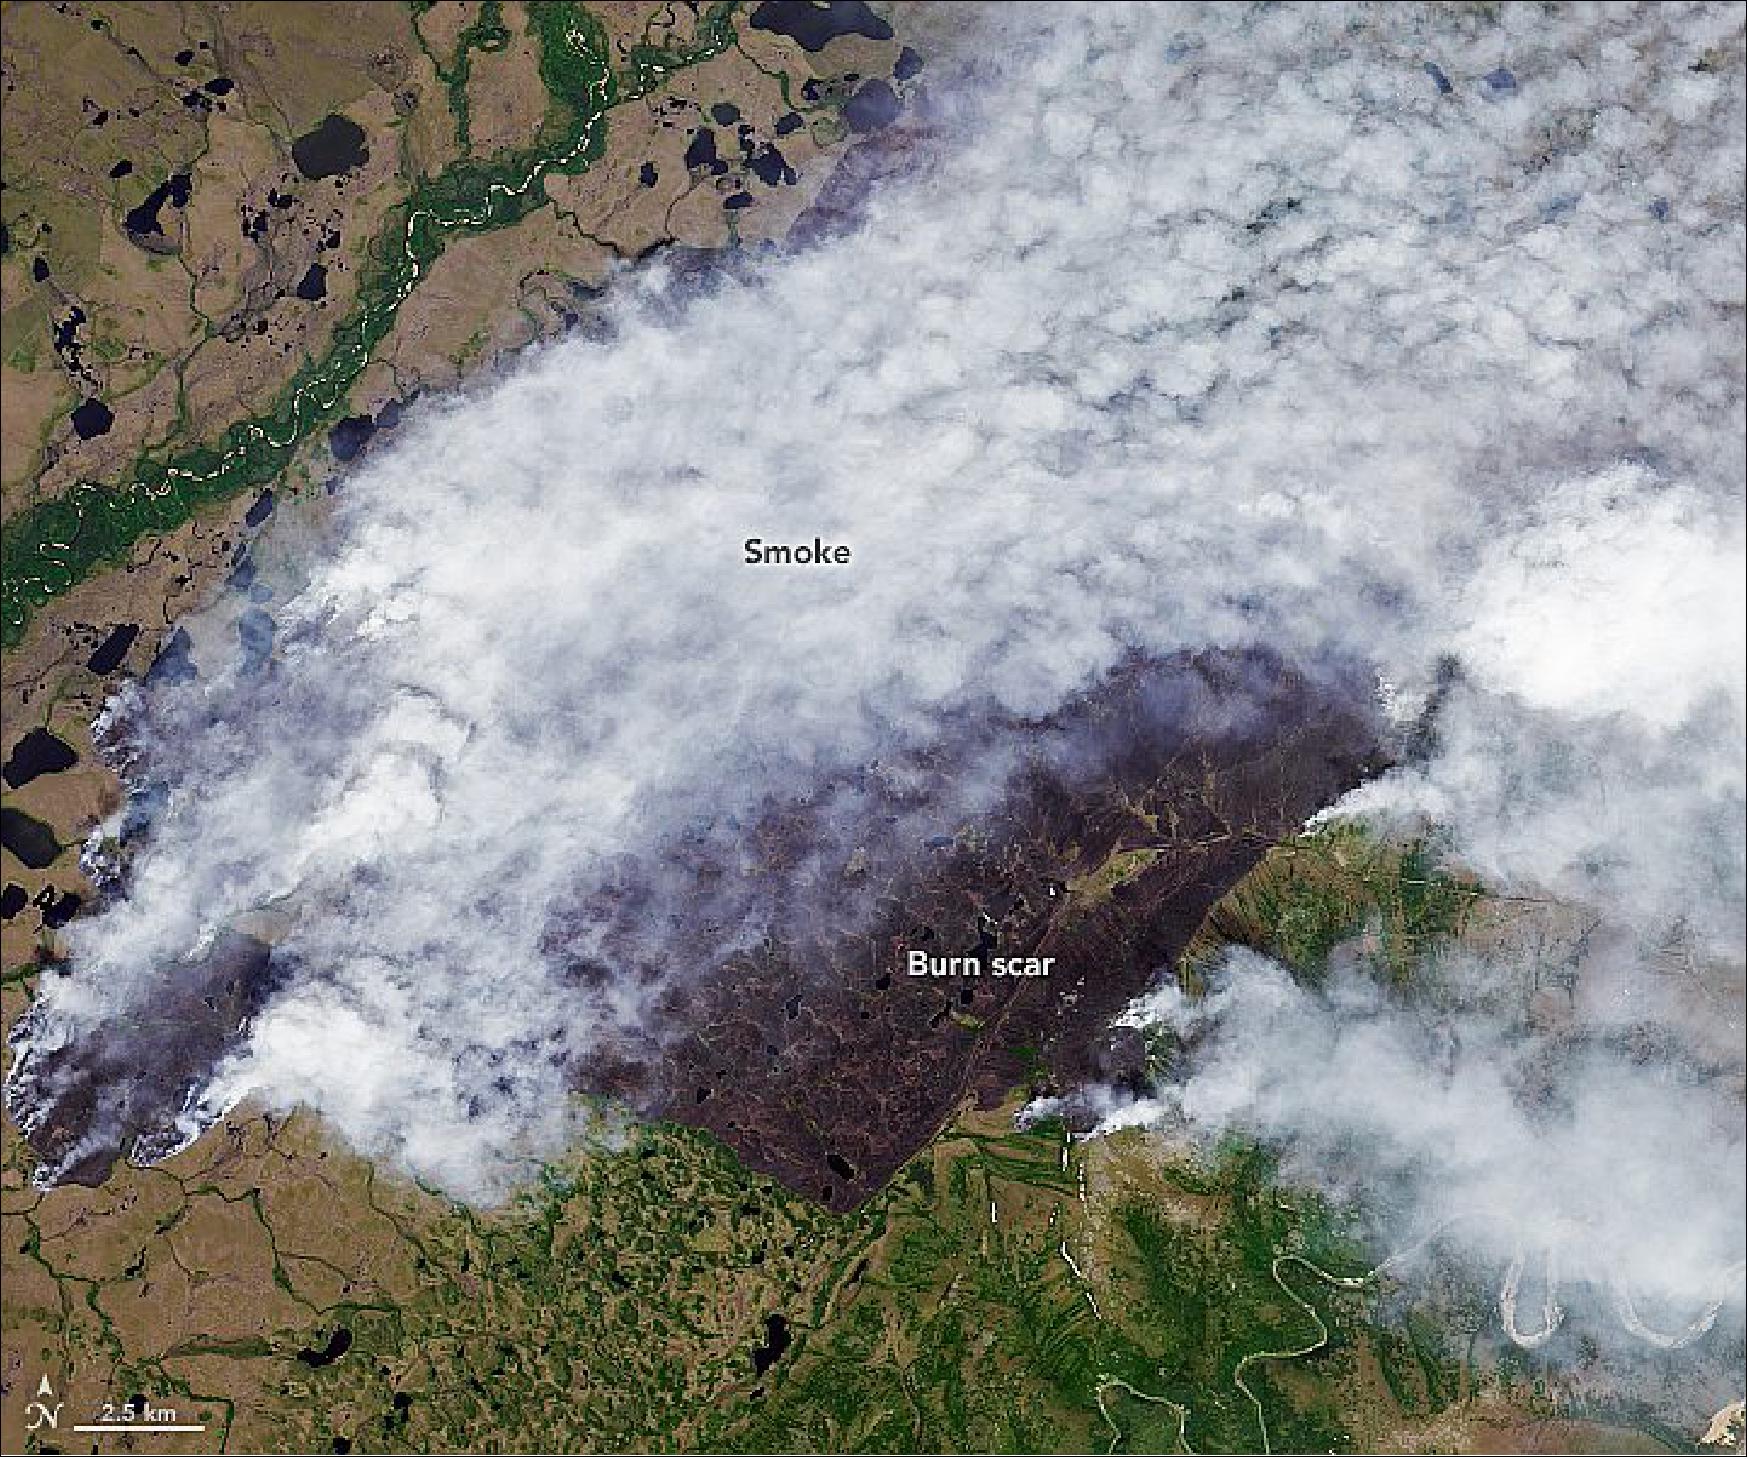 Figure 42: This image, from the Operational Land Imager (OLI) on Landsat-8, shows a detailed view of one of the fires on July 4 (image credit: NASA Earth Observatory)